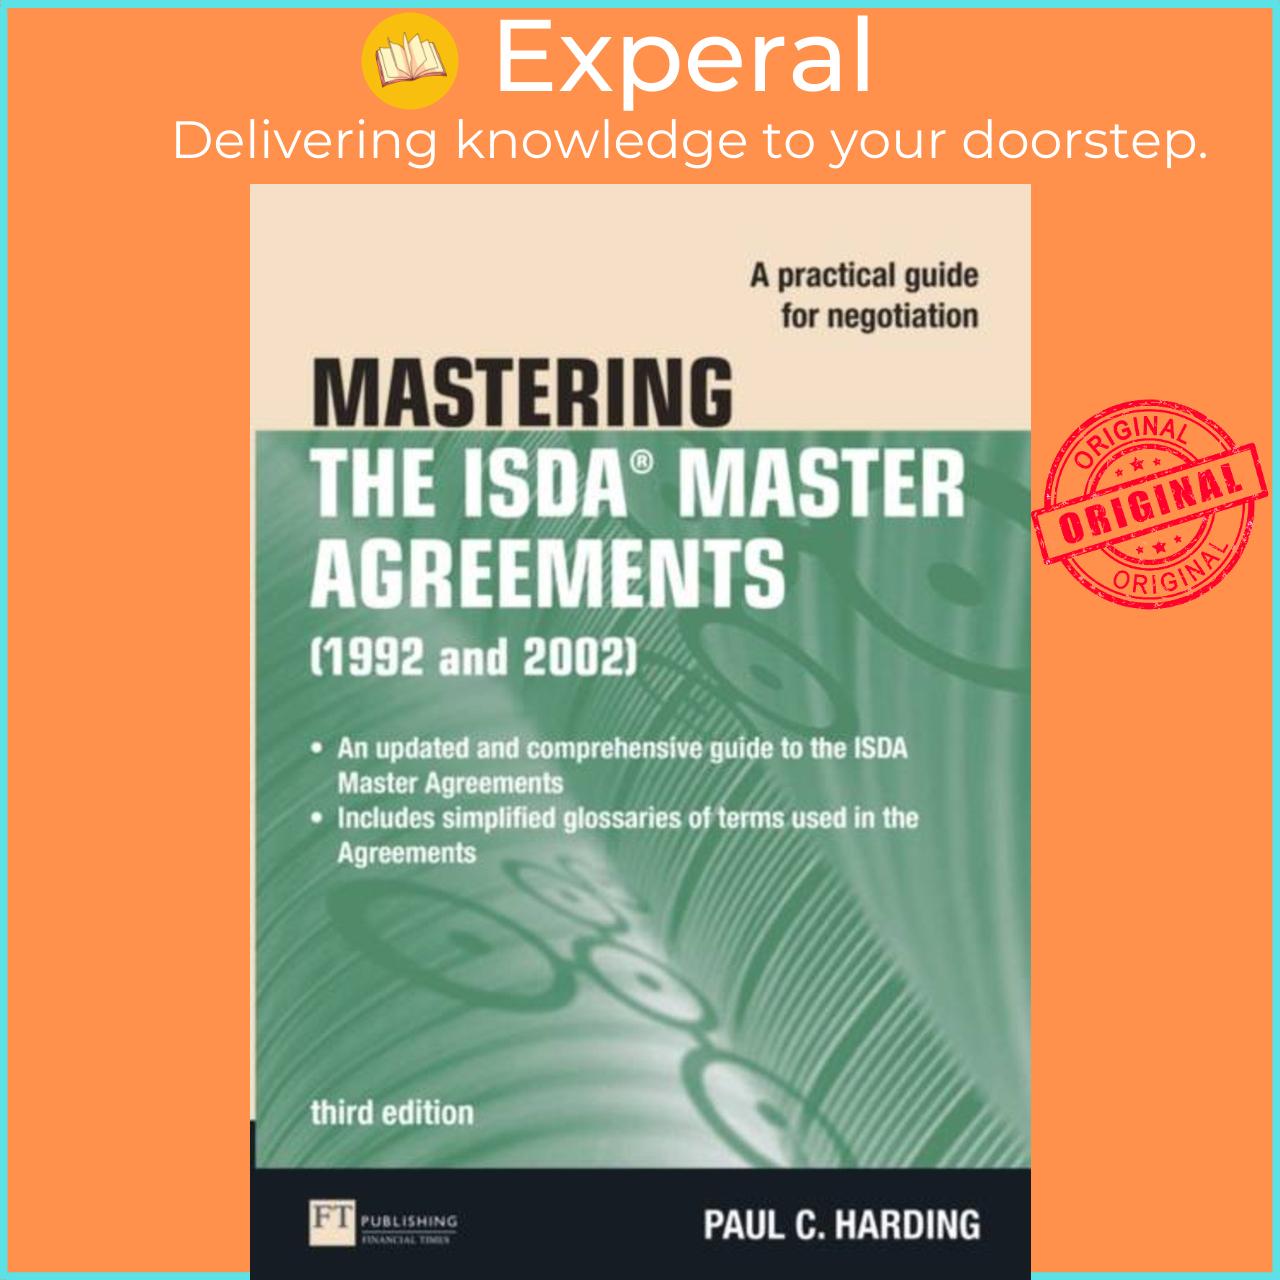 Sách - Mastering the ISDA Master Agreements - A Practical Guide for Negotiation by Paul Harding (UK edition, paperback)